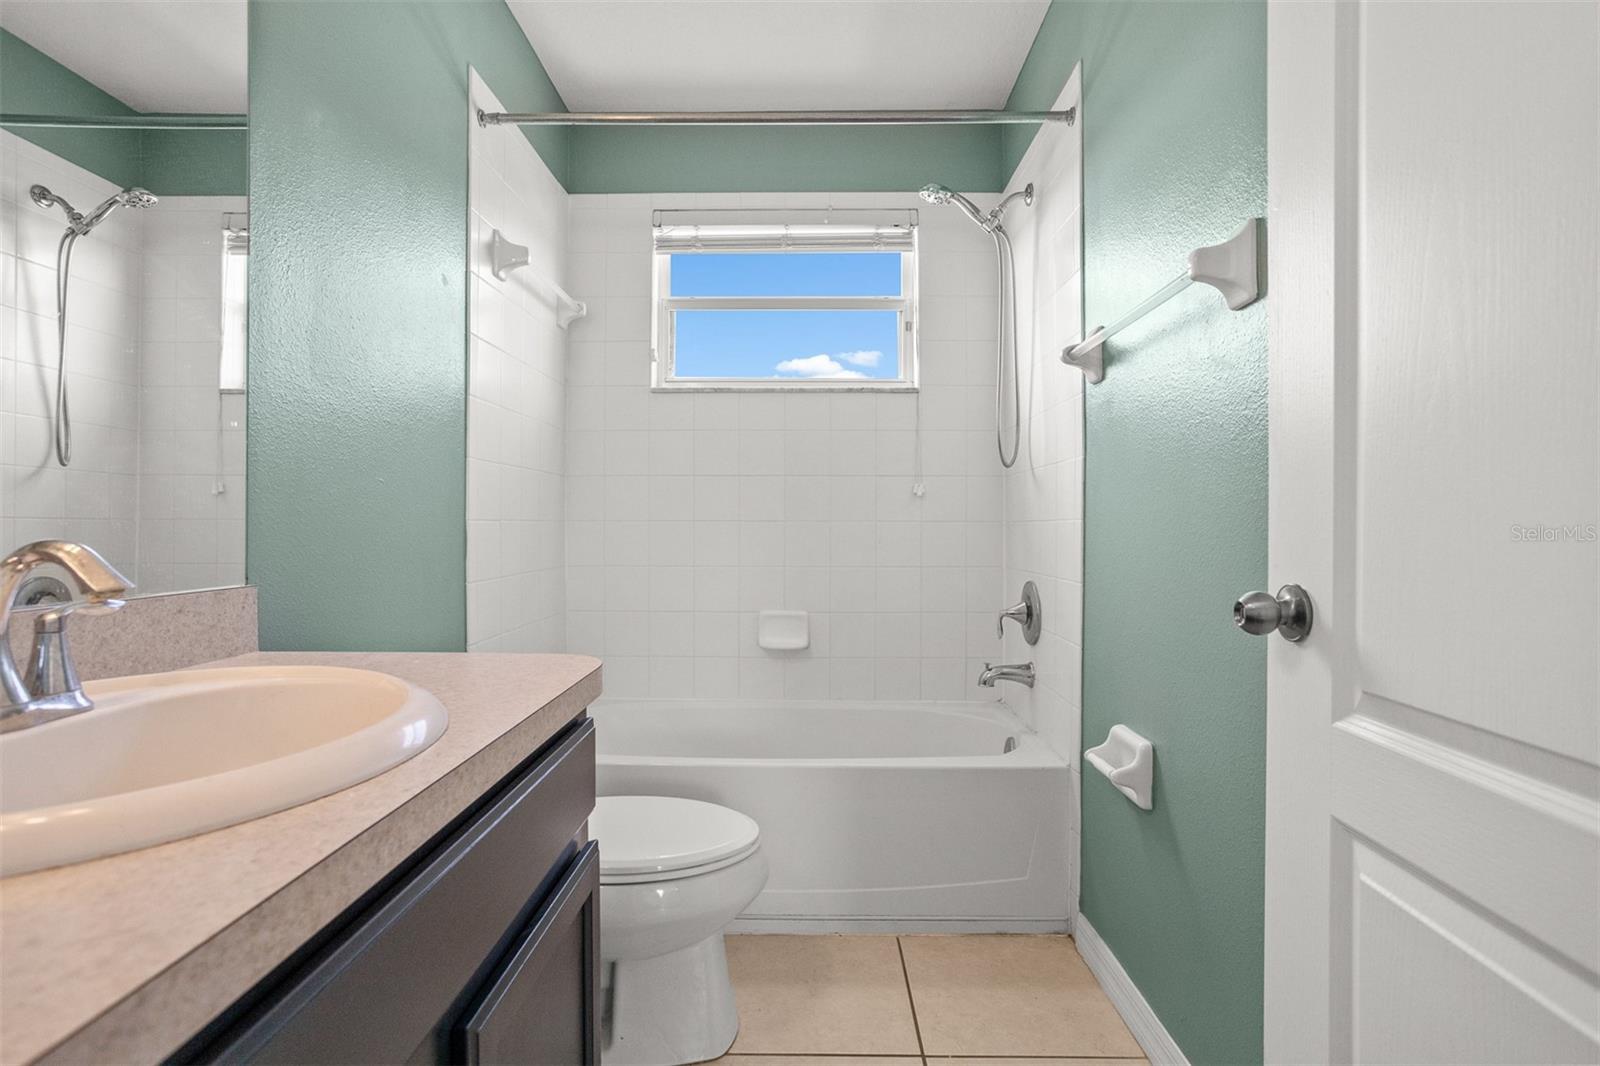 Hall bath that the guest bedrooms share